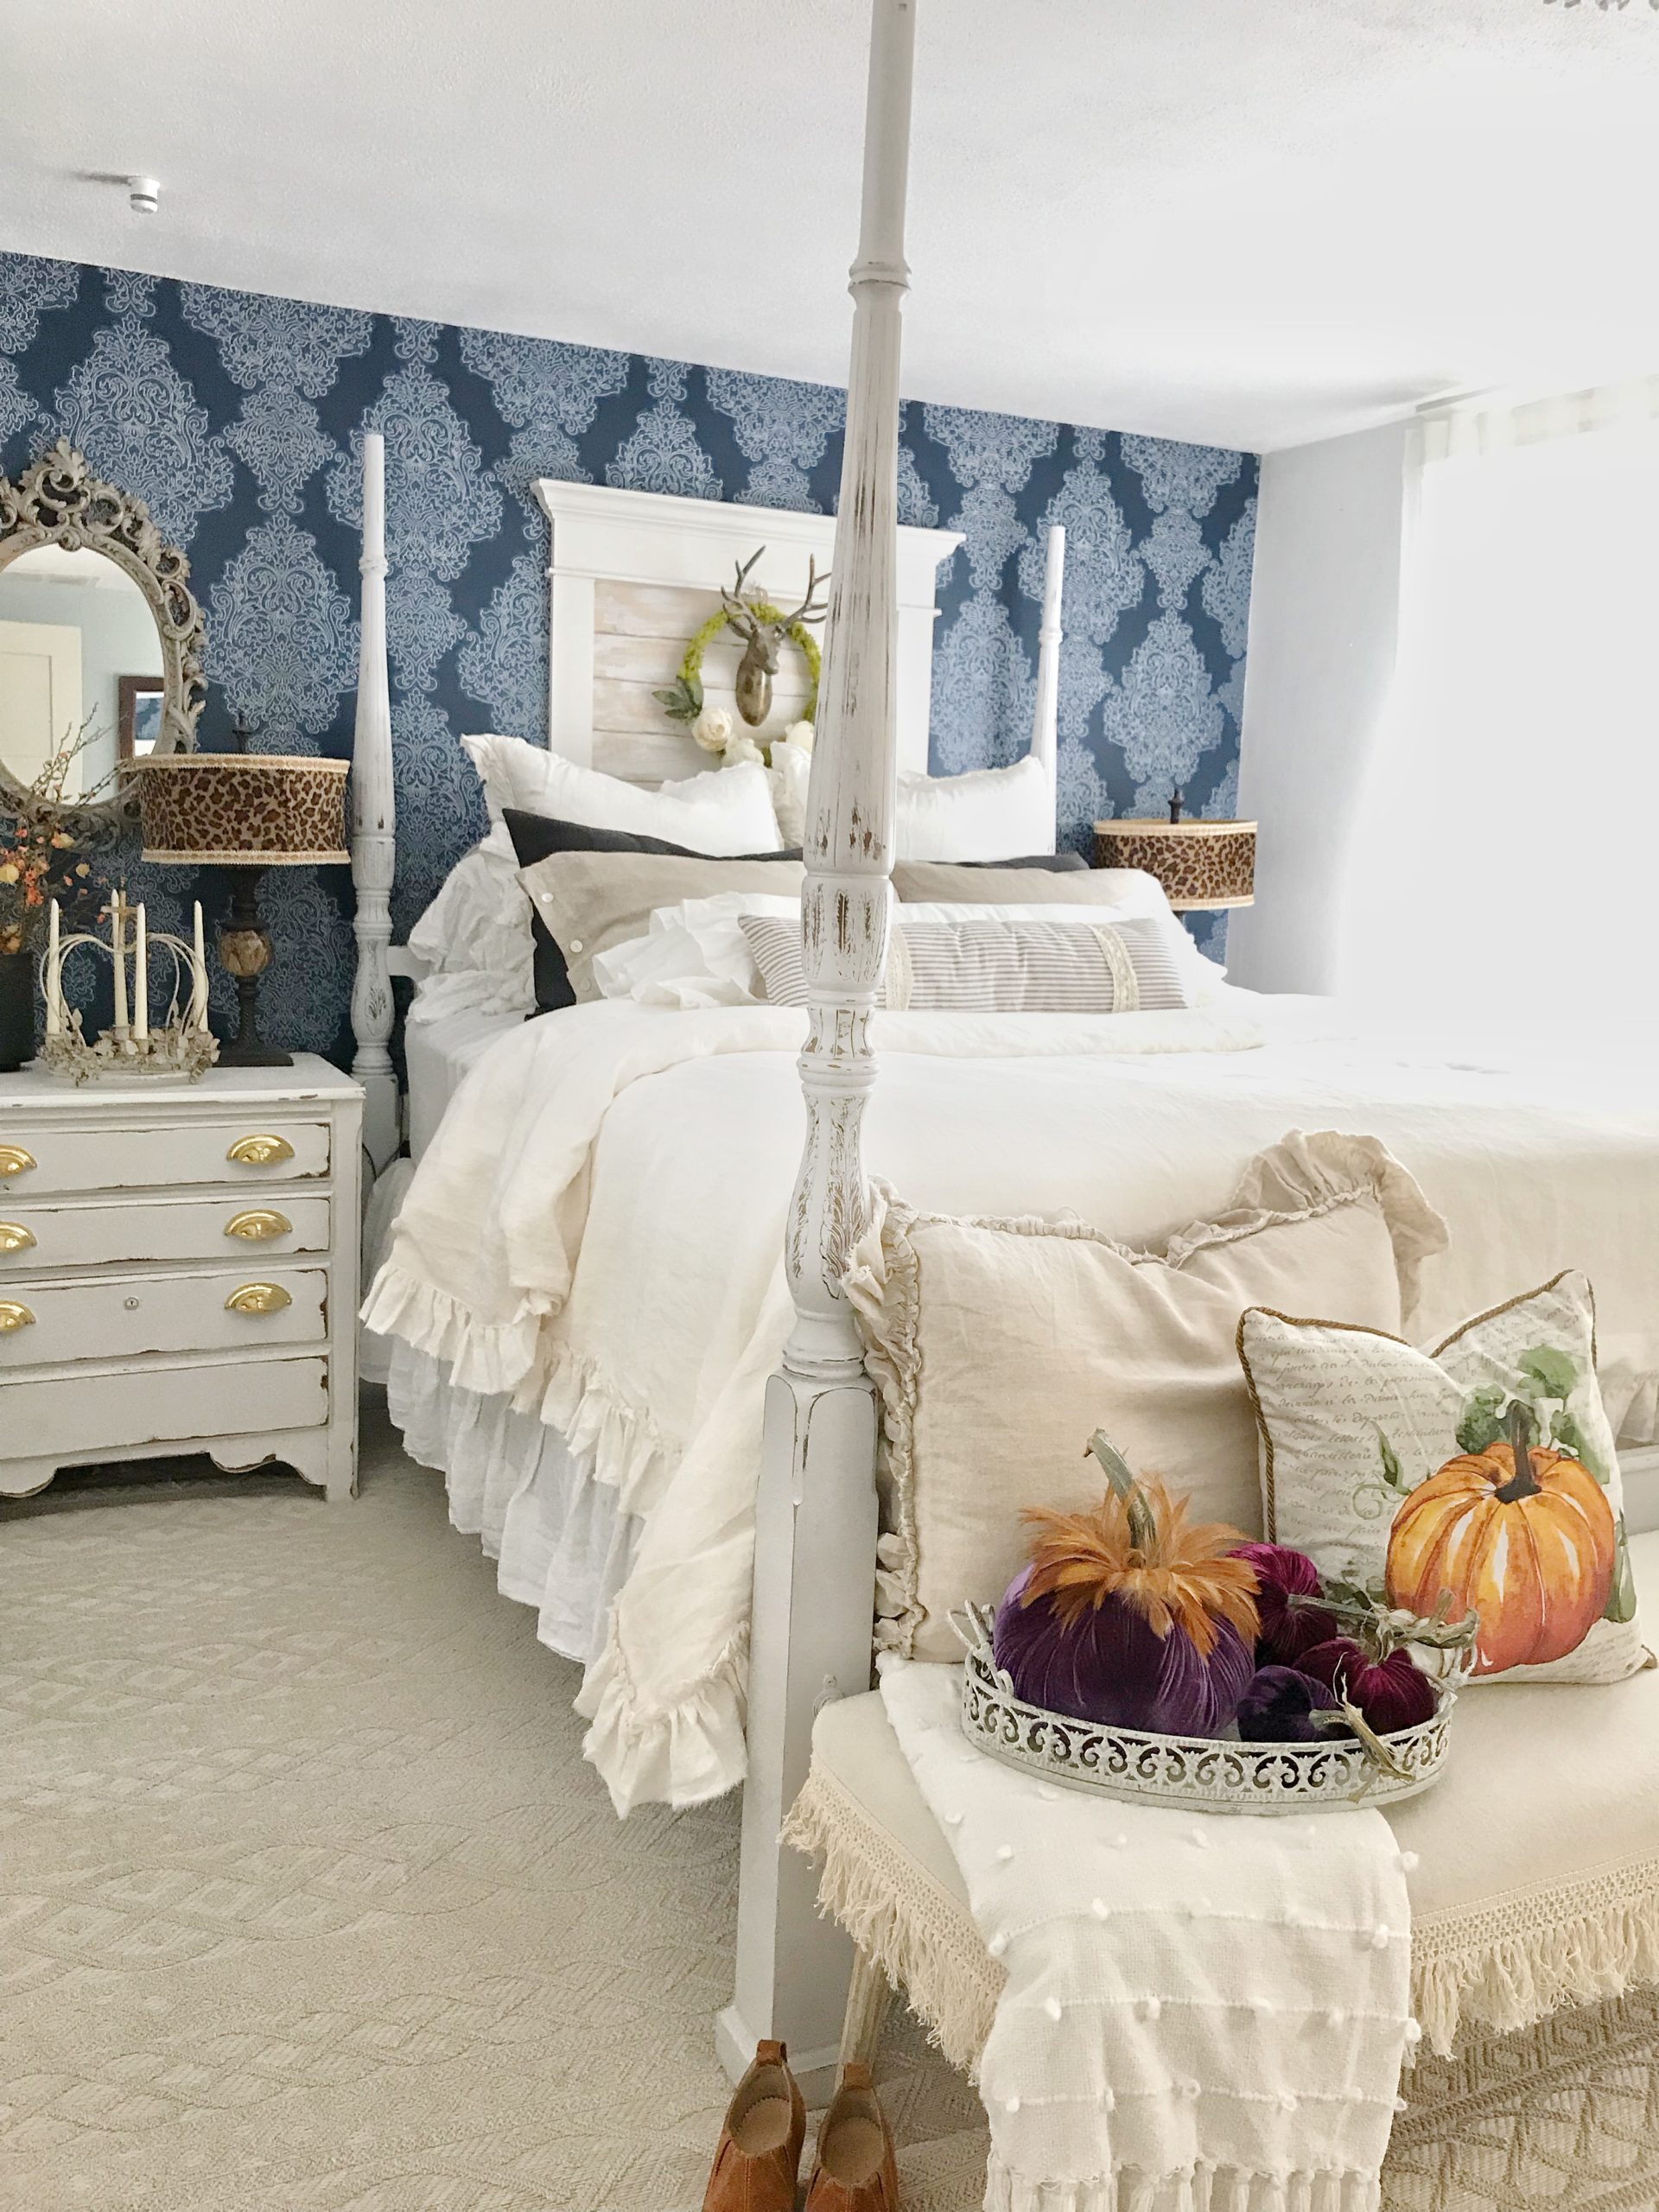 How to Decorate Bedrooms for Easy Fall Decor